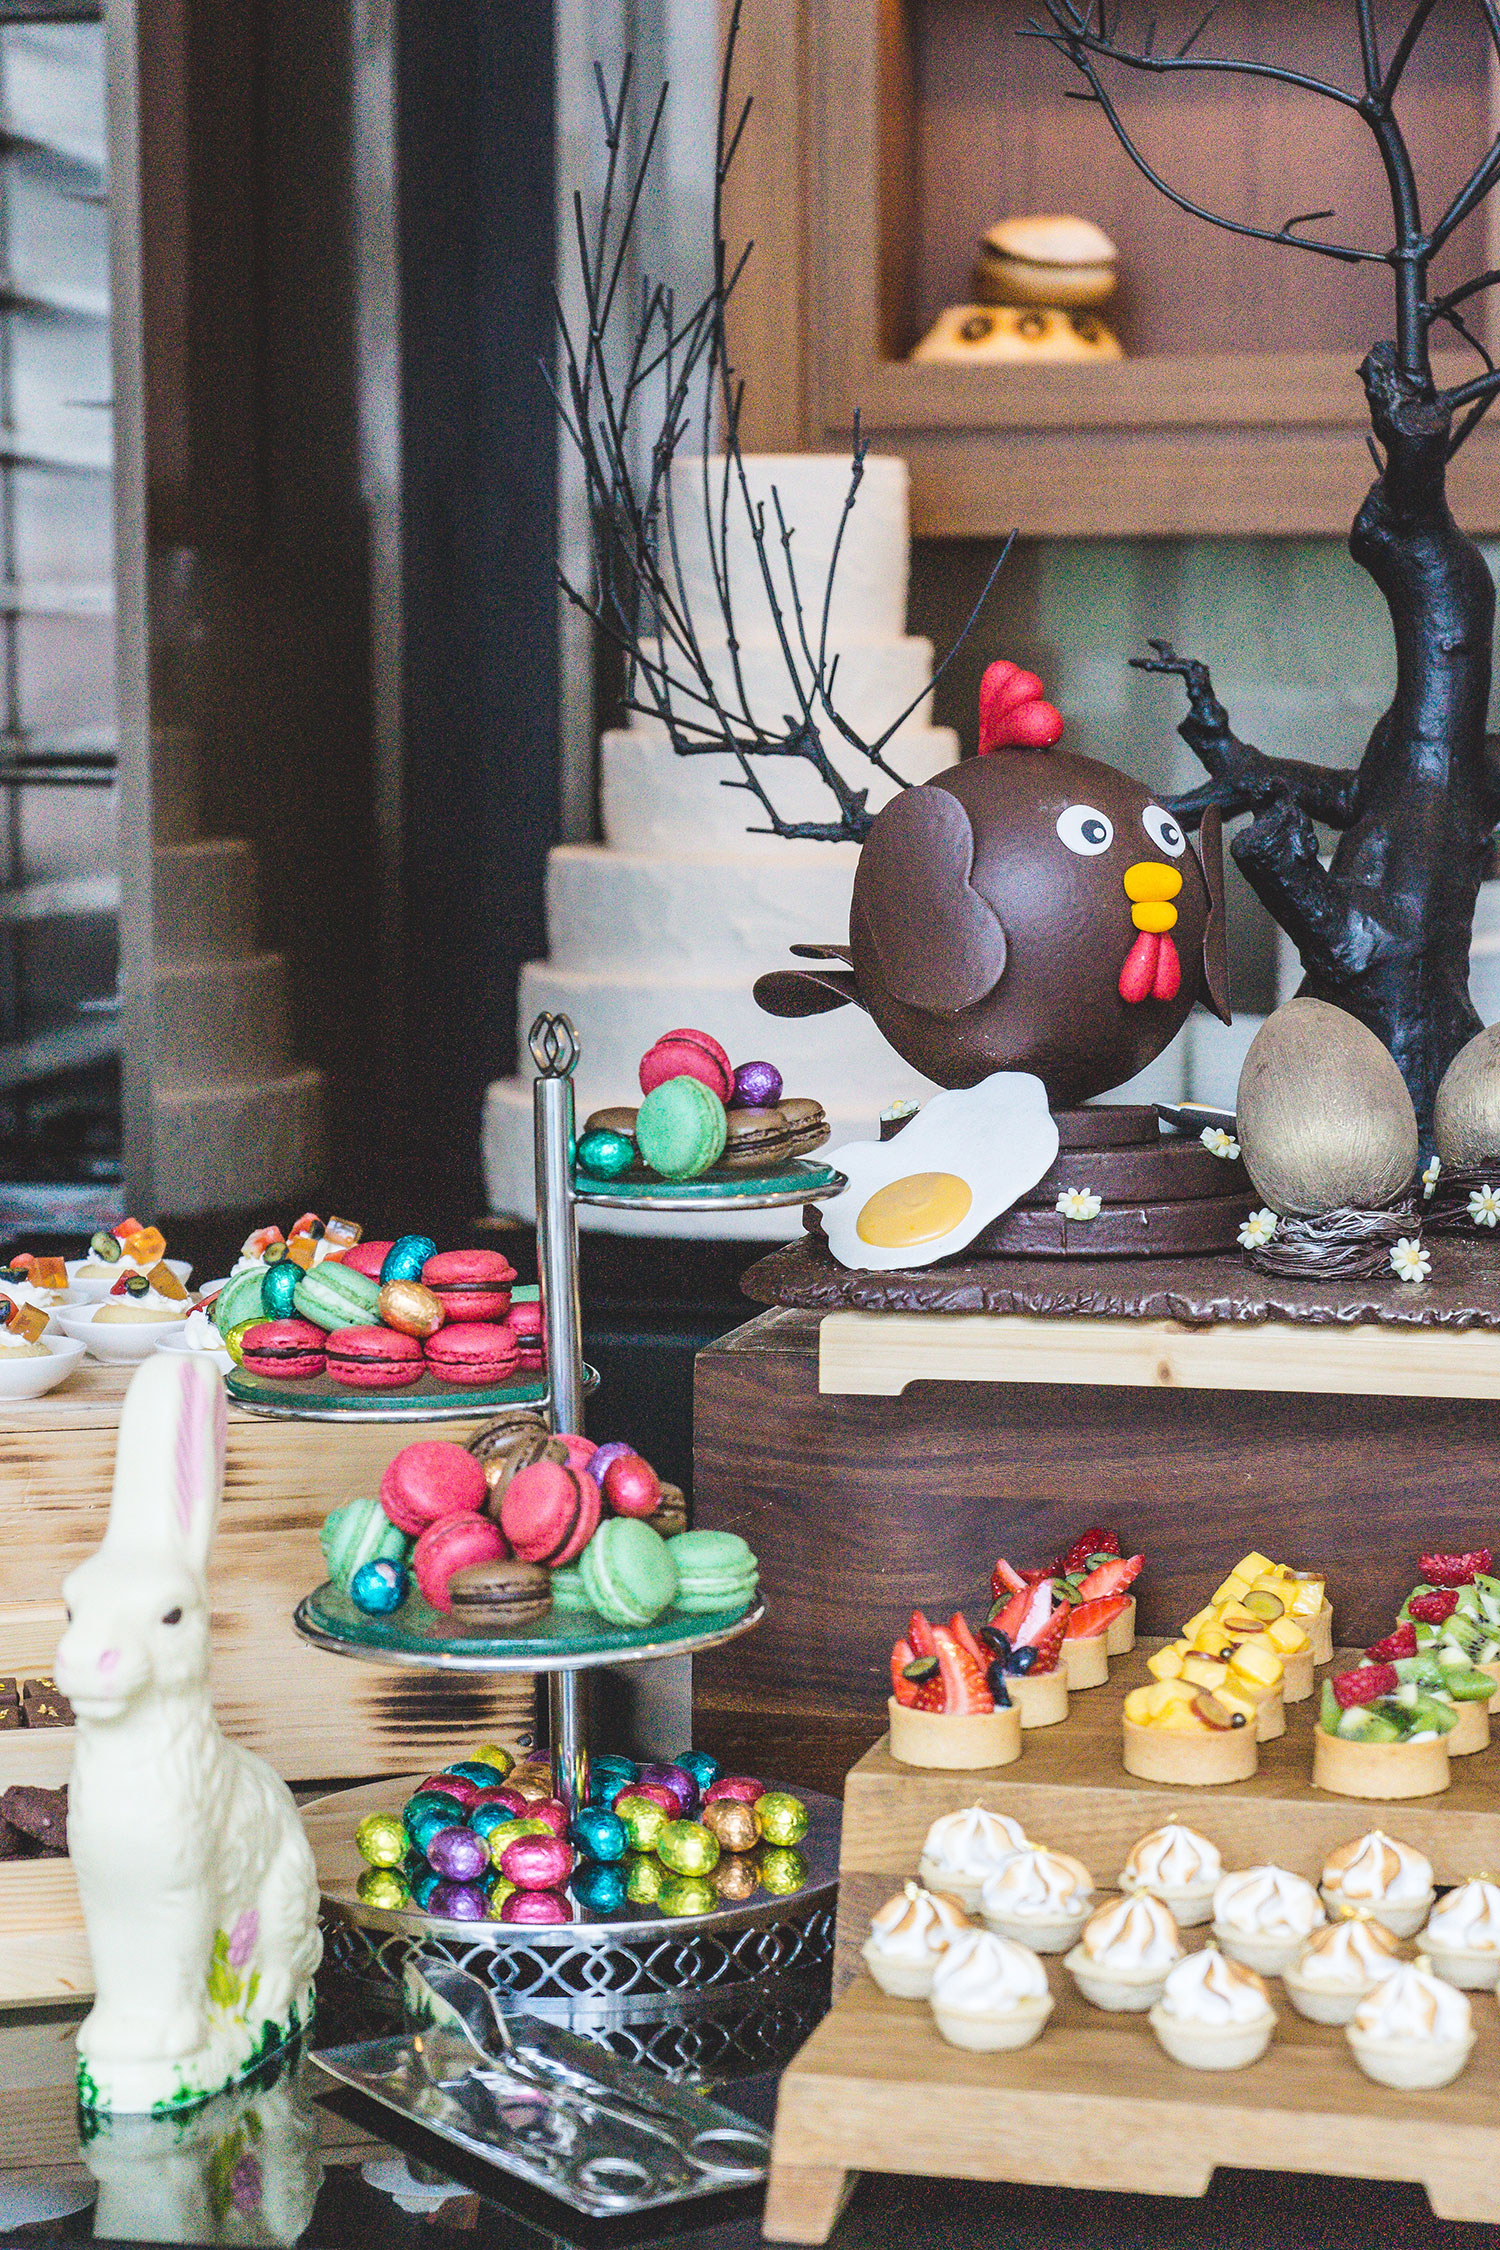 A Magnifique Easter Celebration with Easter Sunday Family Brunch at Racines